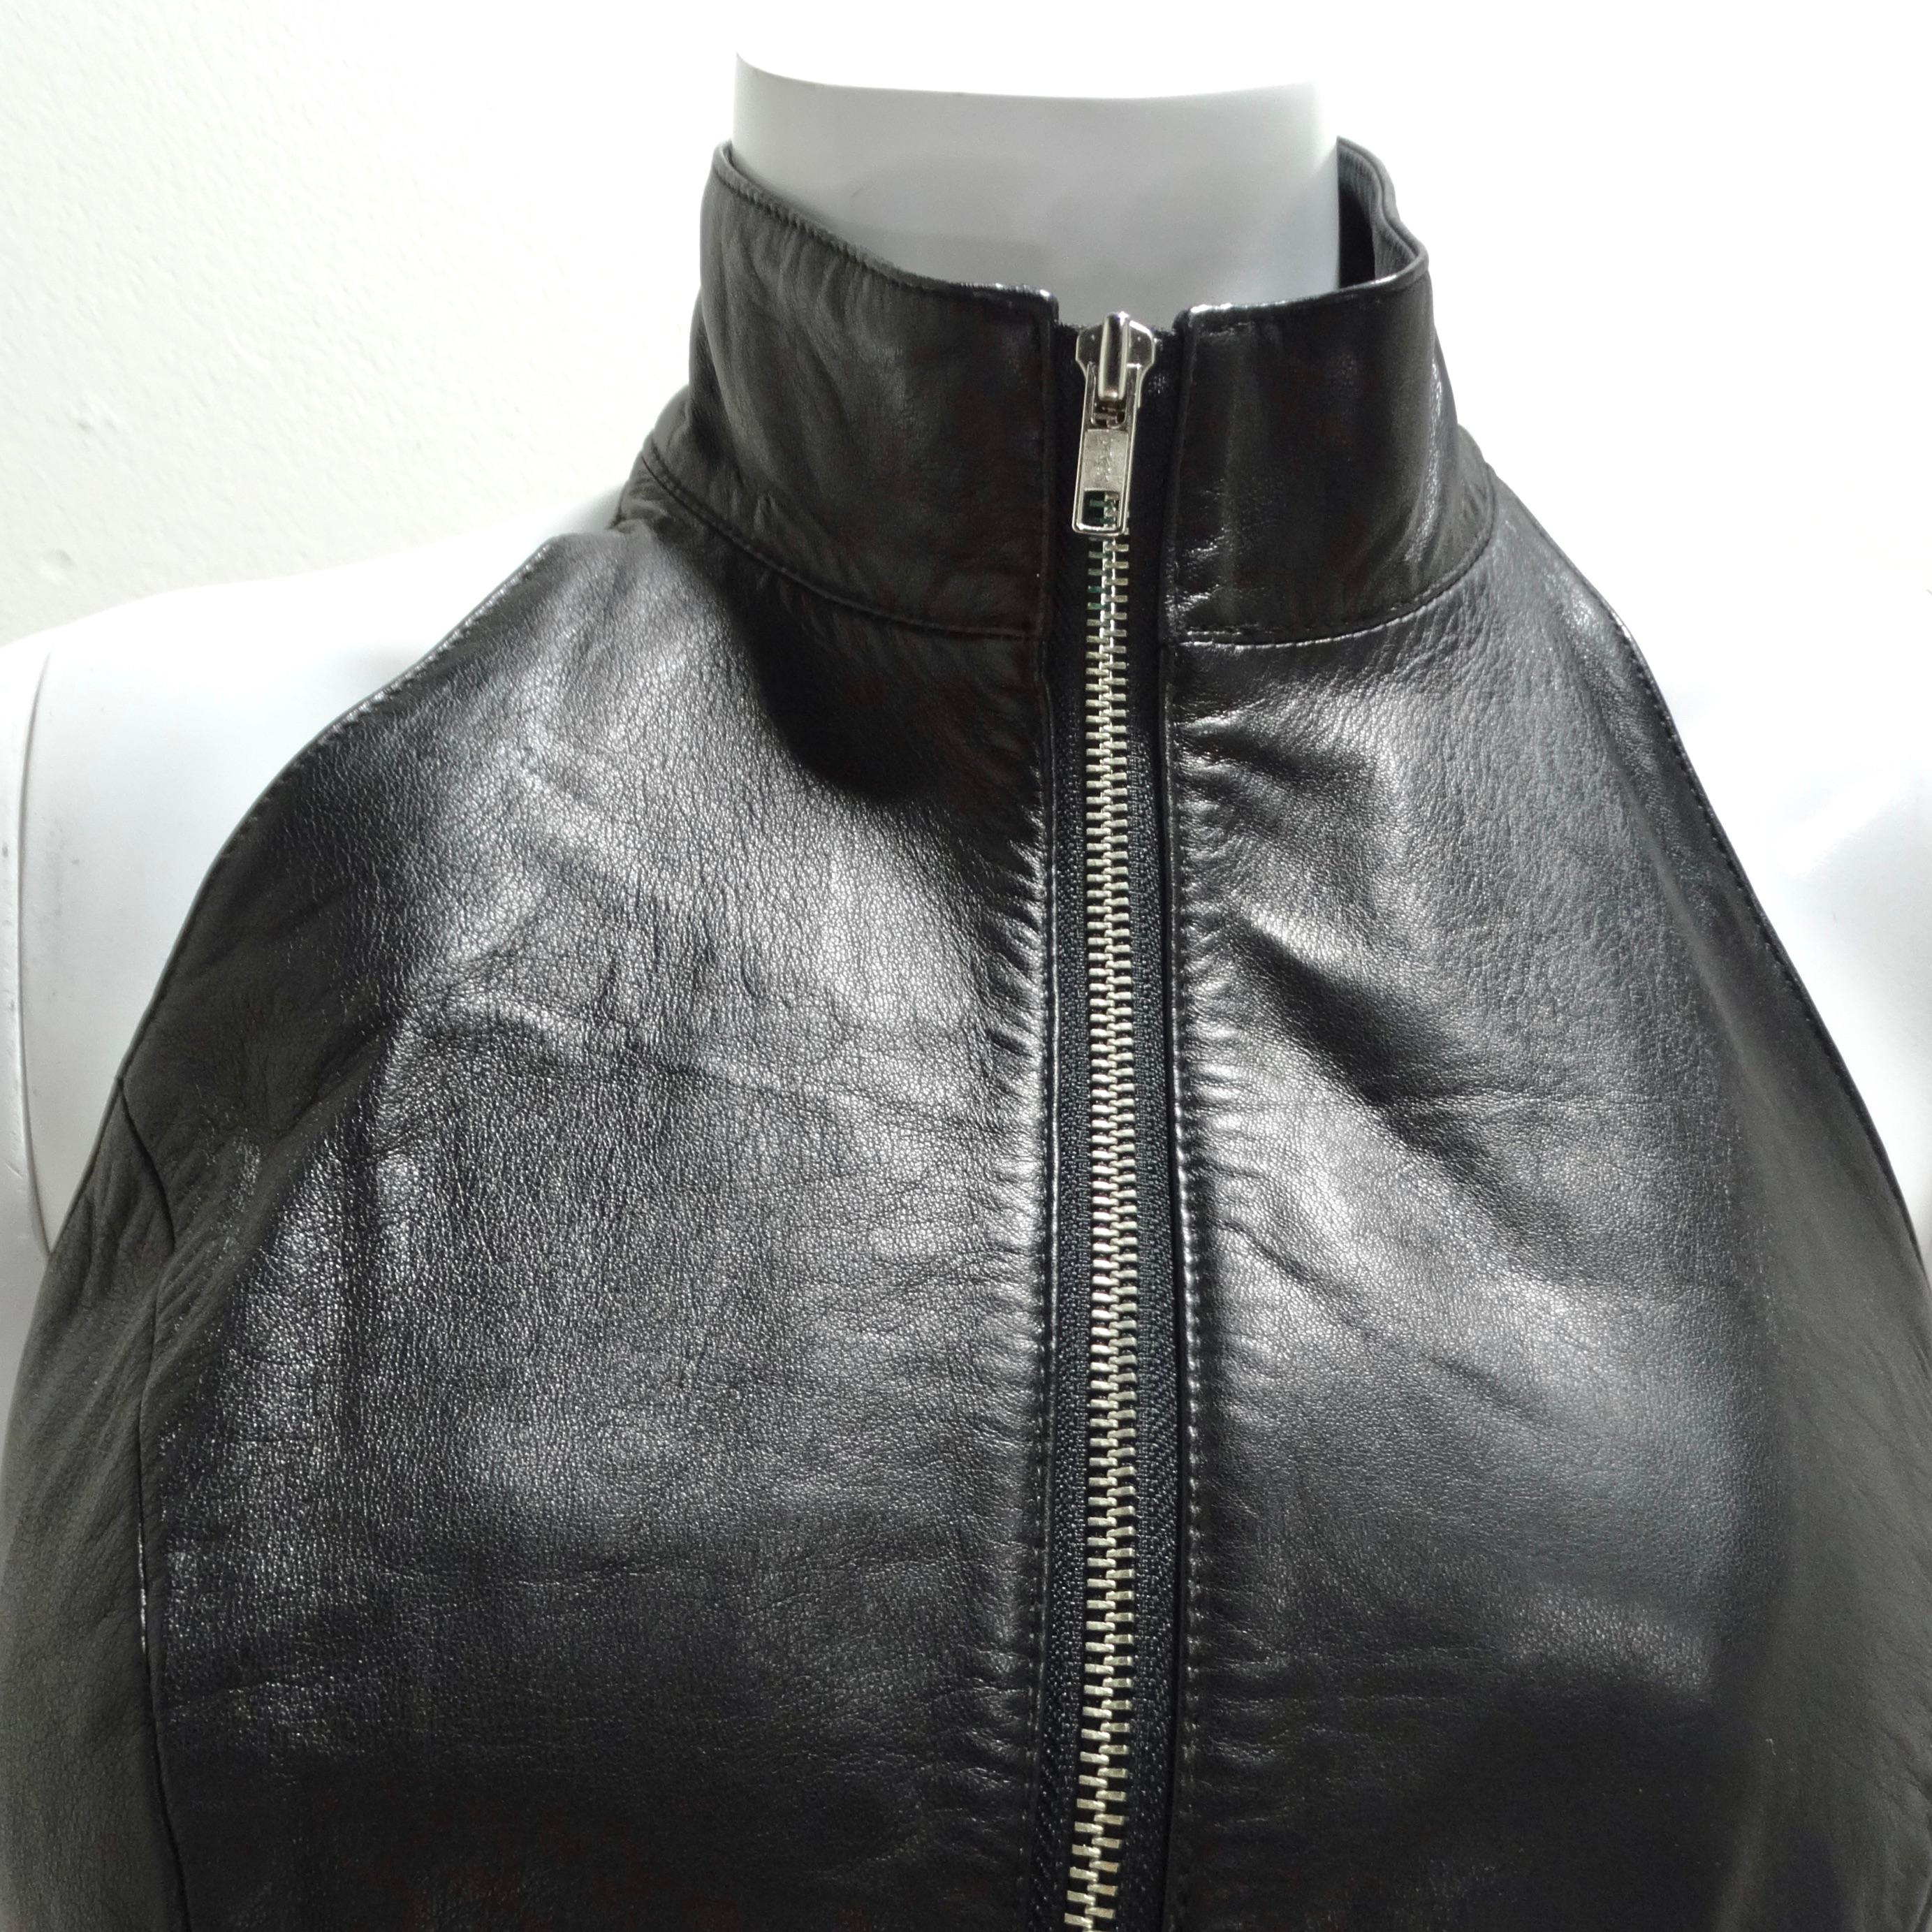 Get your hands on the Michael Hoban 1980s Black Leather Zip-Up Top – a chic and edgy wardrobe essential that effortlessly marries timeless style with a touch of daring flair. This adorable black leather crop top is a versatile piece designed to make